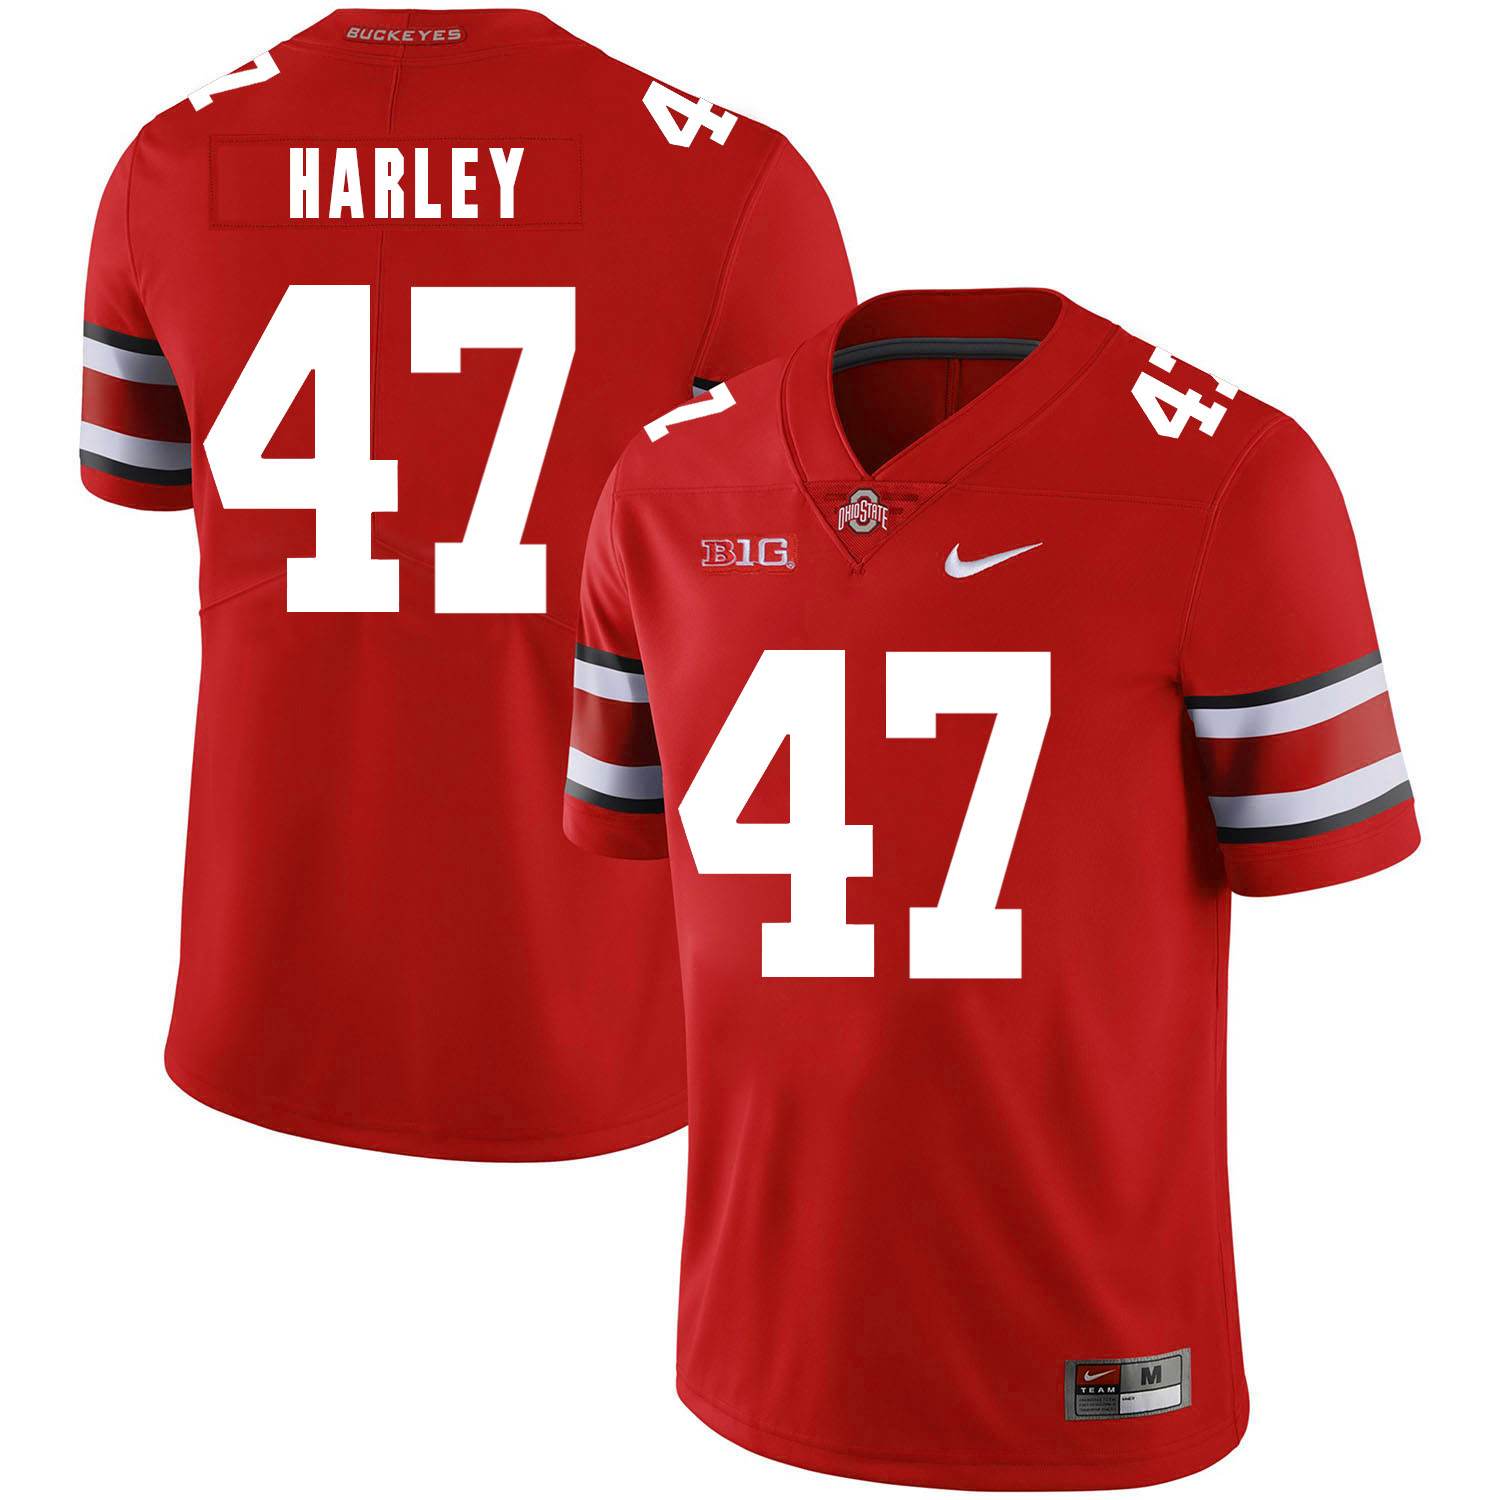 Ohio State Buckeyes 47 Chic Harley Red Nike College Football Jersey